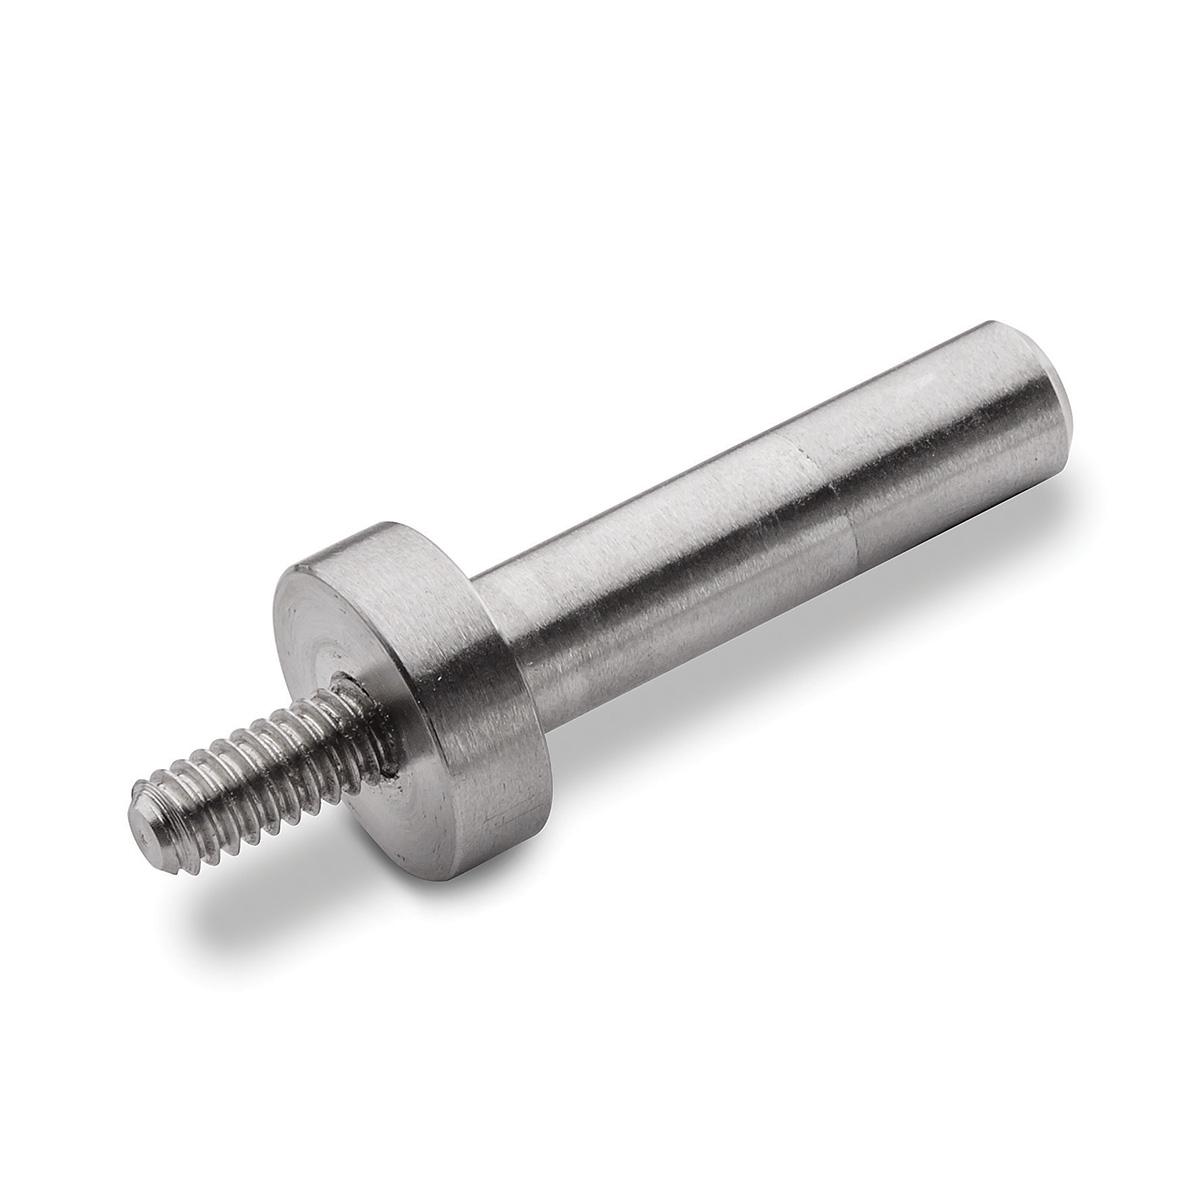 To make turning the new kits easier, Rockler now also is offering a 3/4" Shoulder Mandrel with 1/4"-20 Threads.